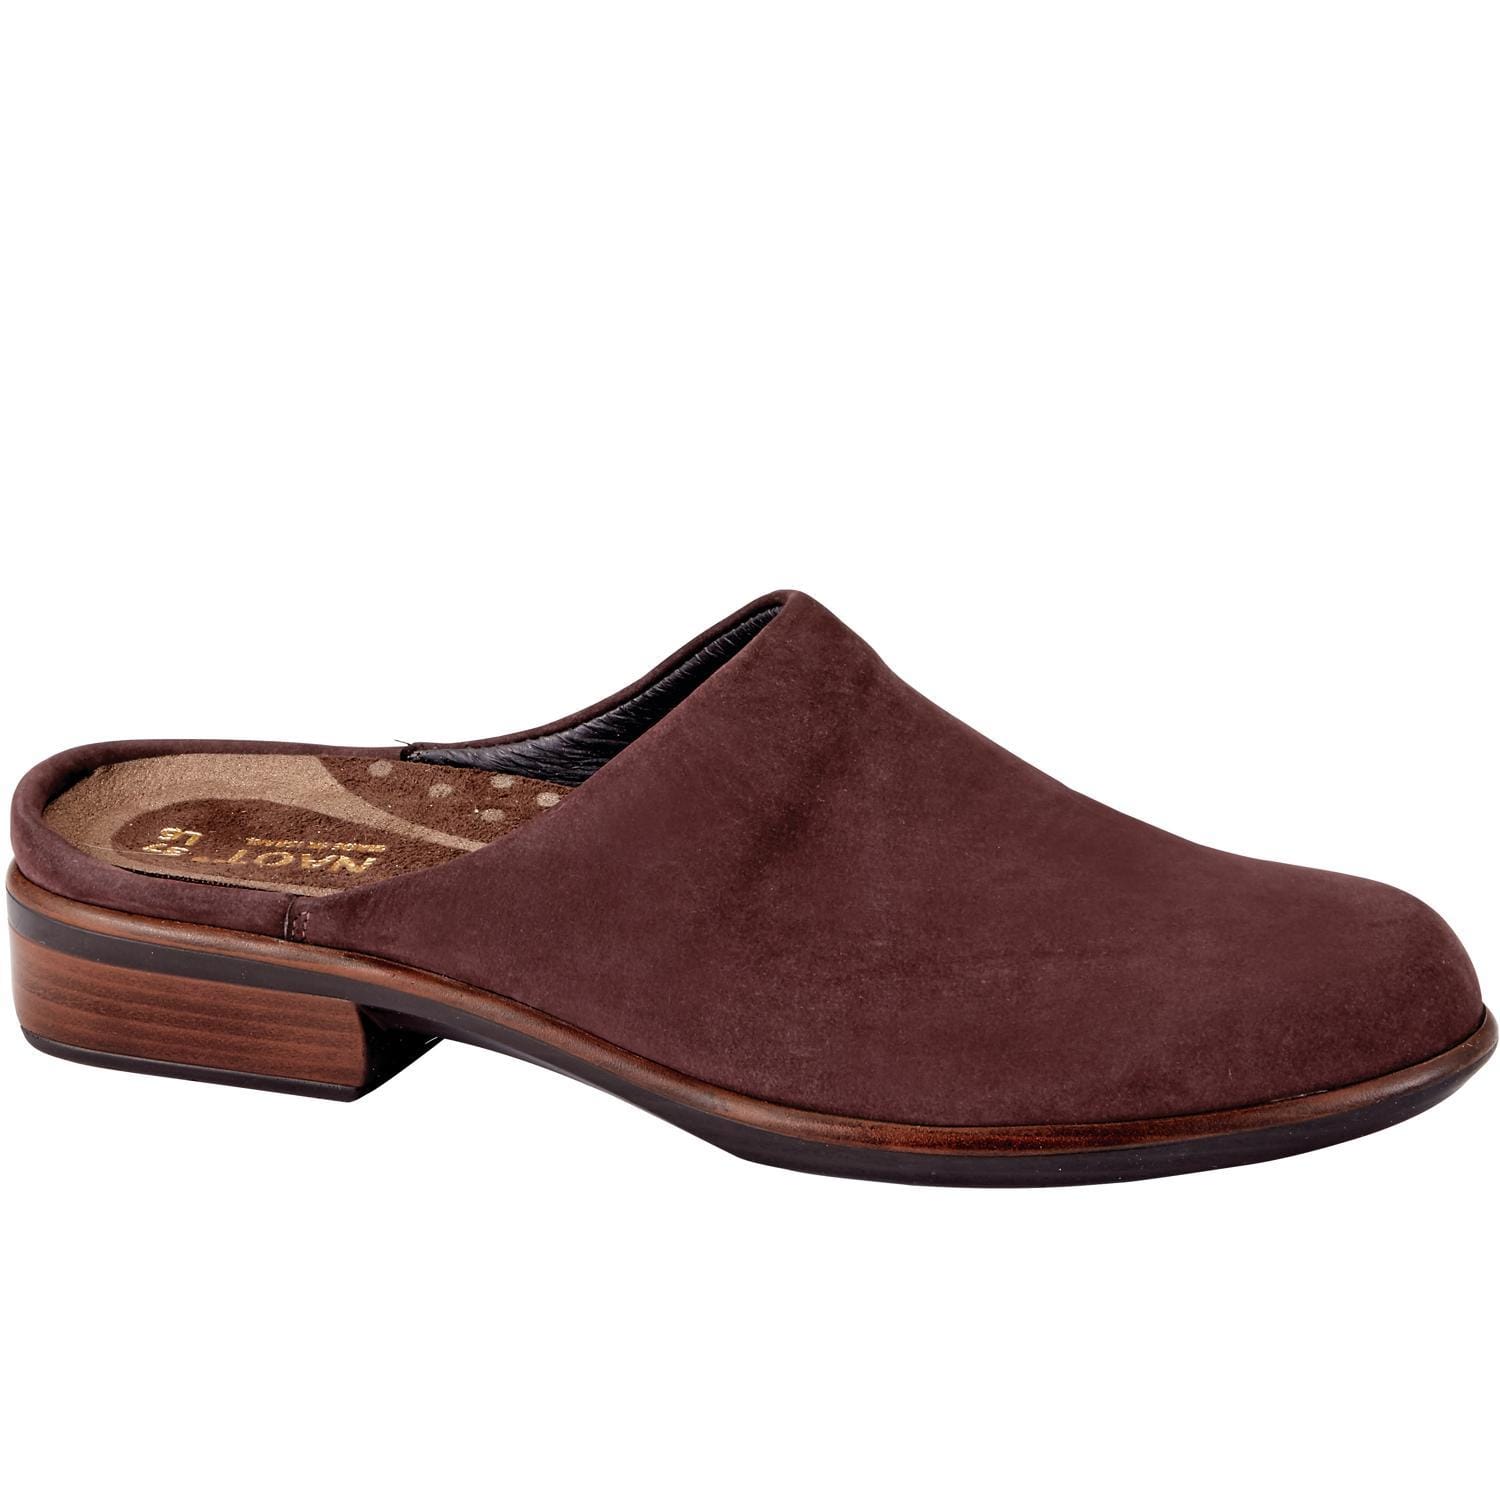 Naot Lodos Women's Suede Slide | Slip On Mule Loafer | Simons Shoes